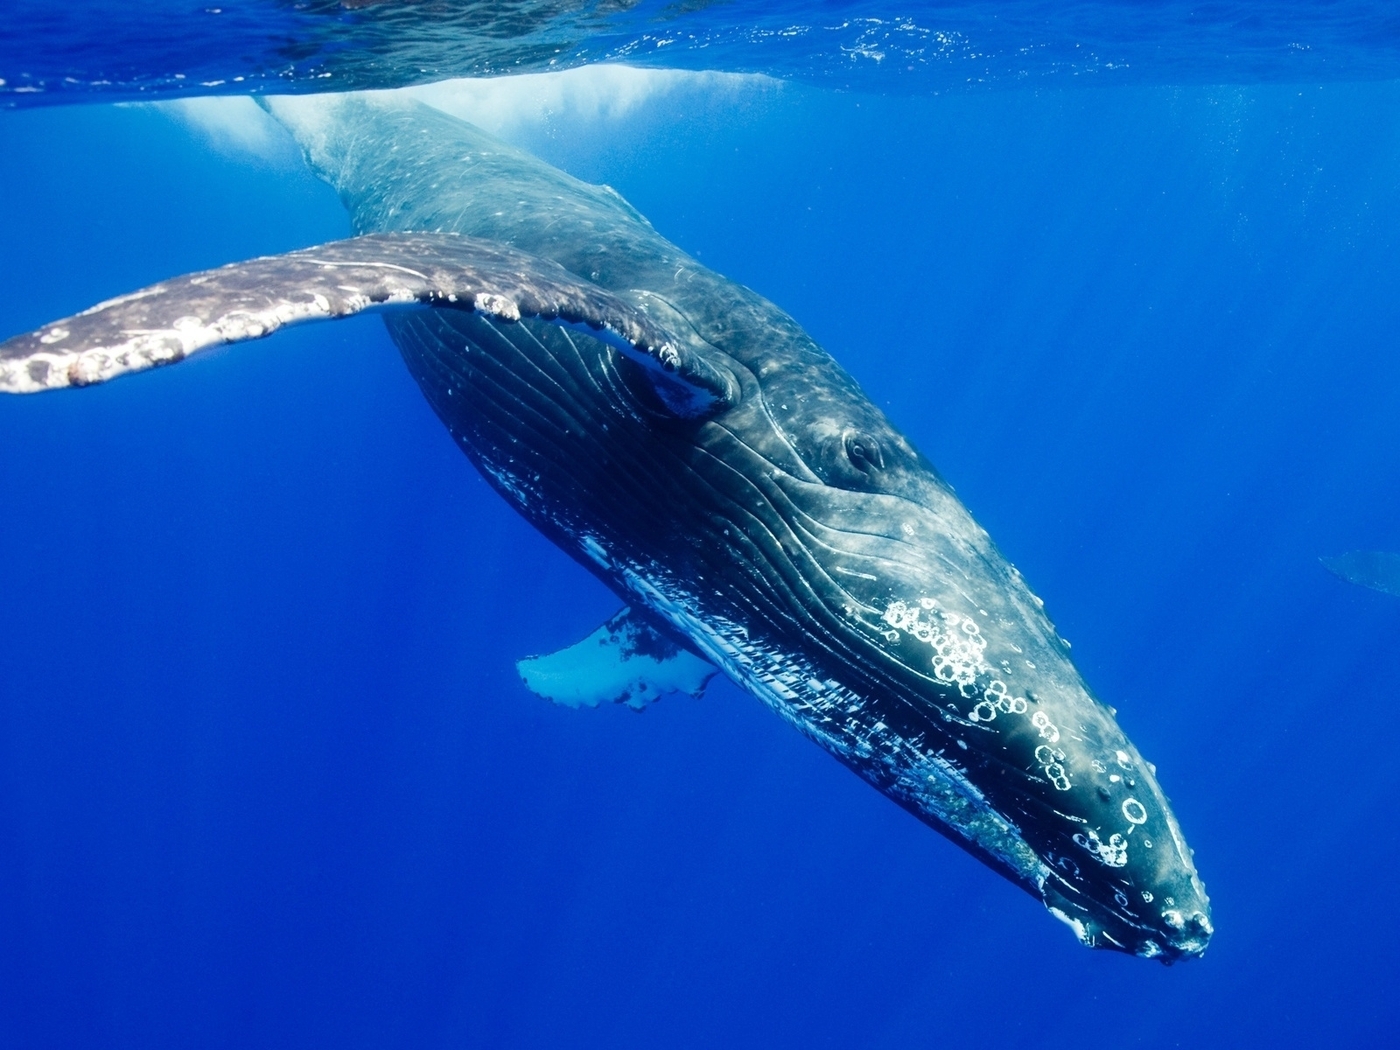 Image: Animal, Humpback whale, whale, fins, surface, diving, rays, splash